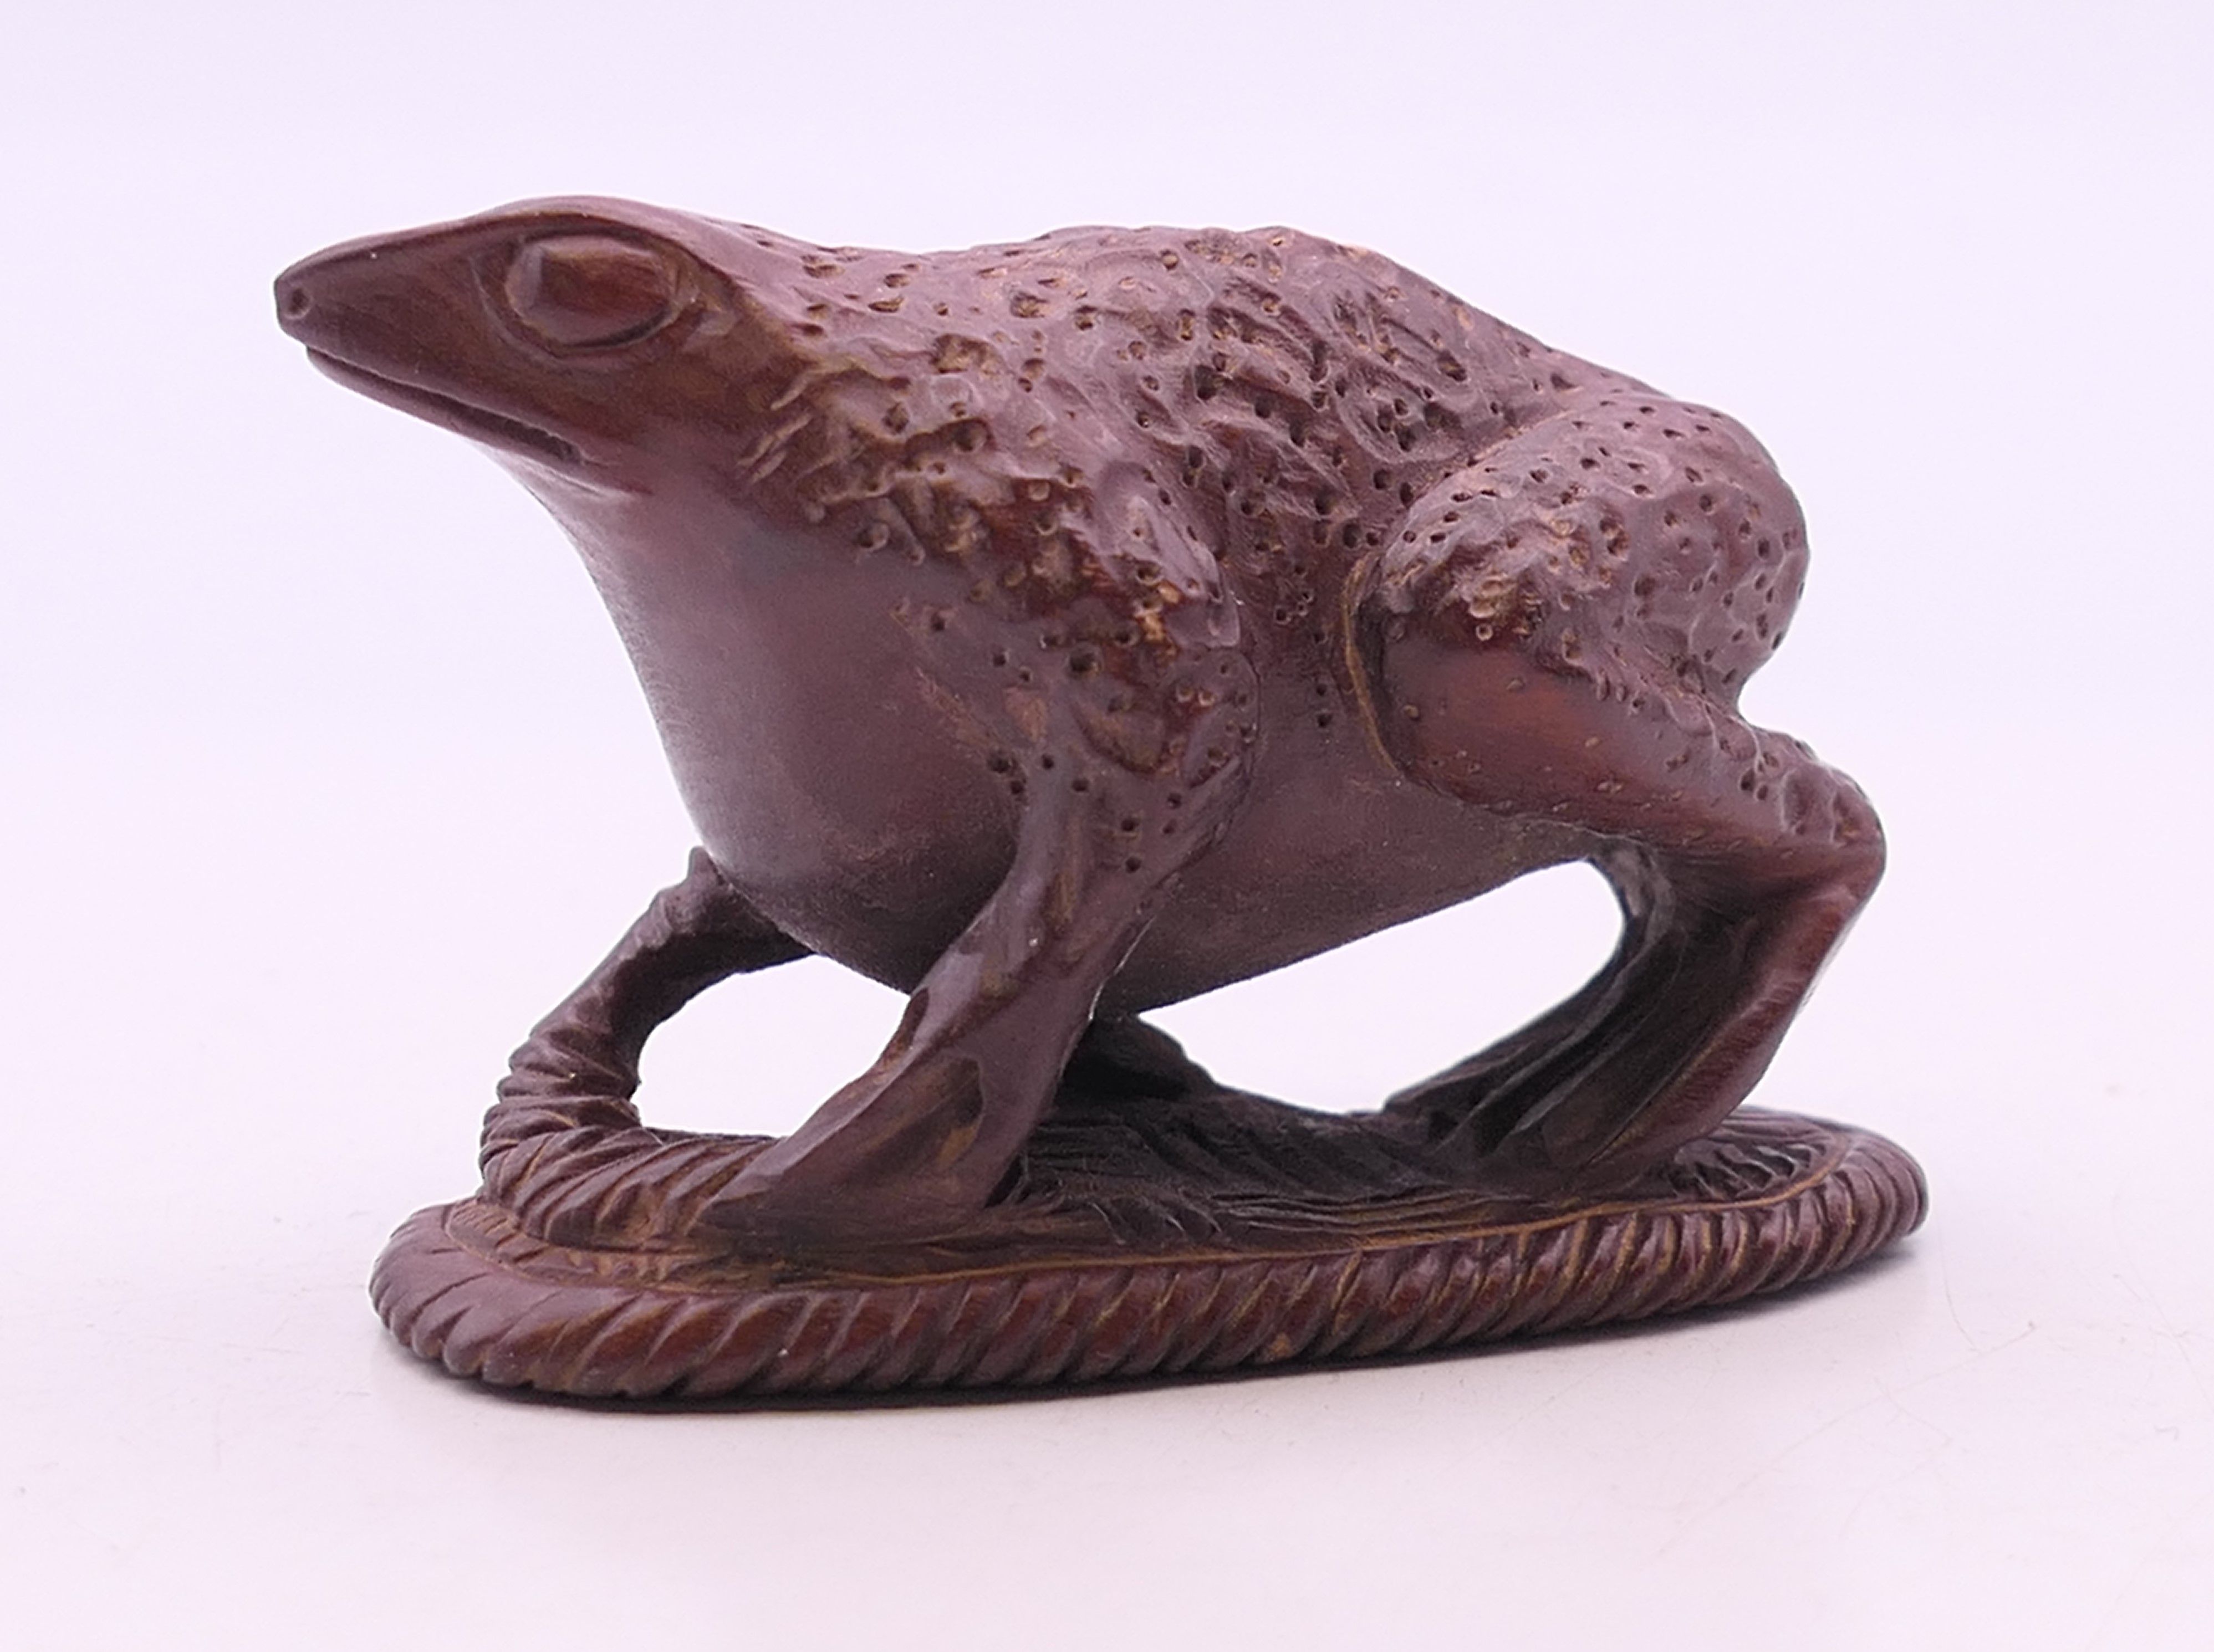 A carving of a frog. 3.5 cm high.